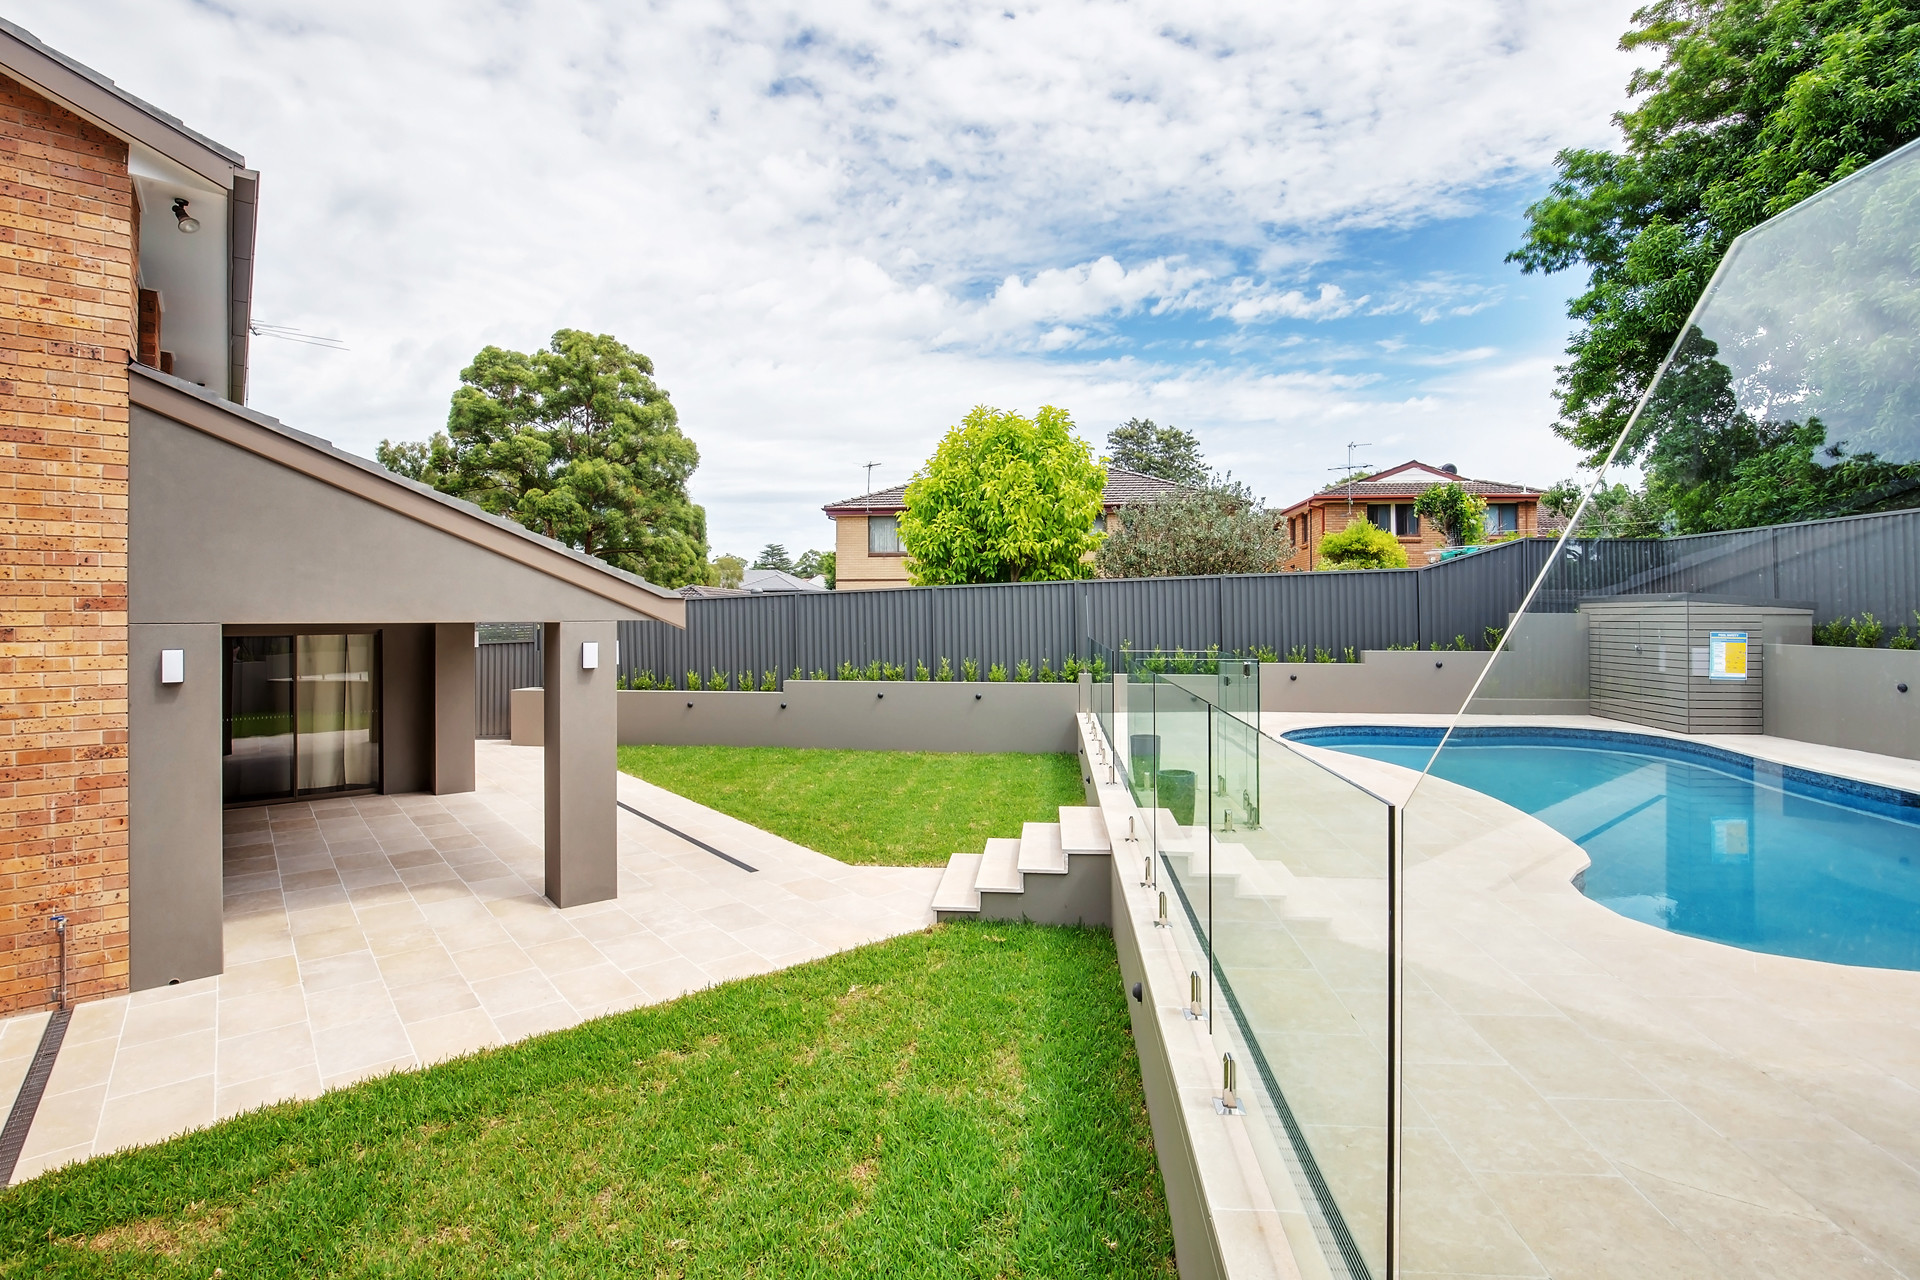 Landscaping and Pool, North Ryde